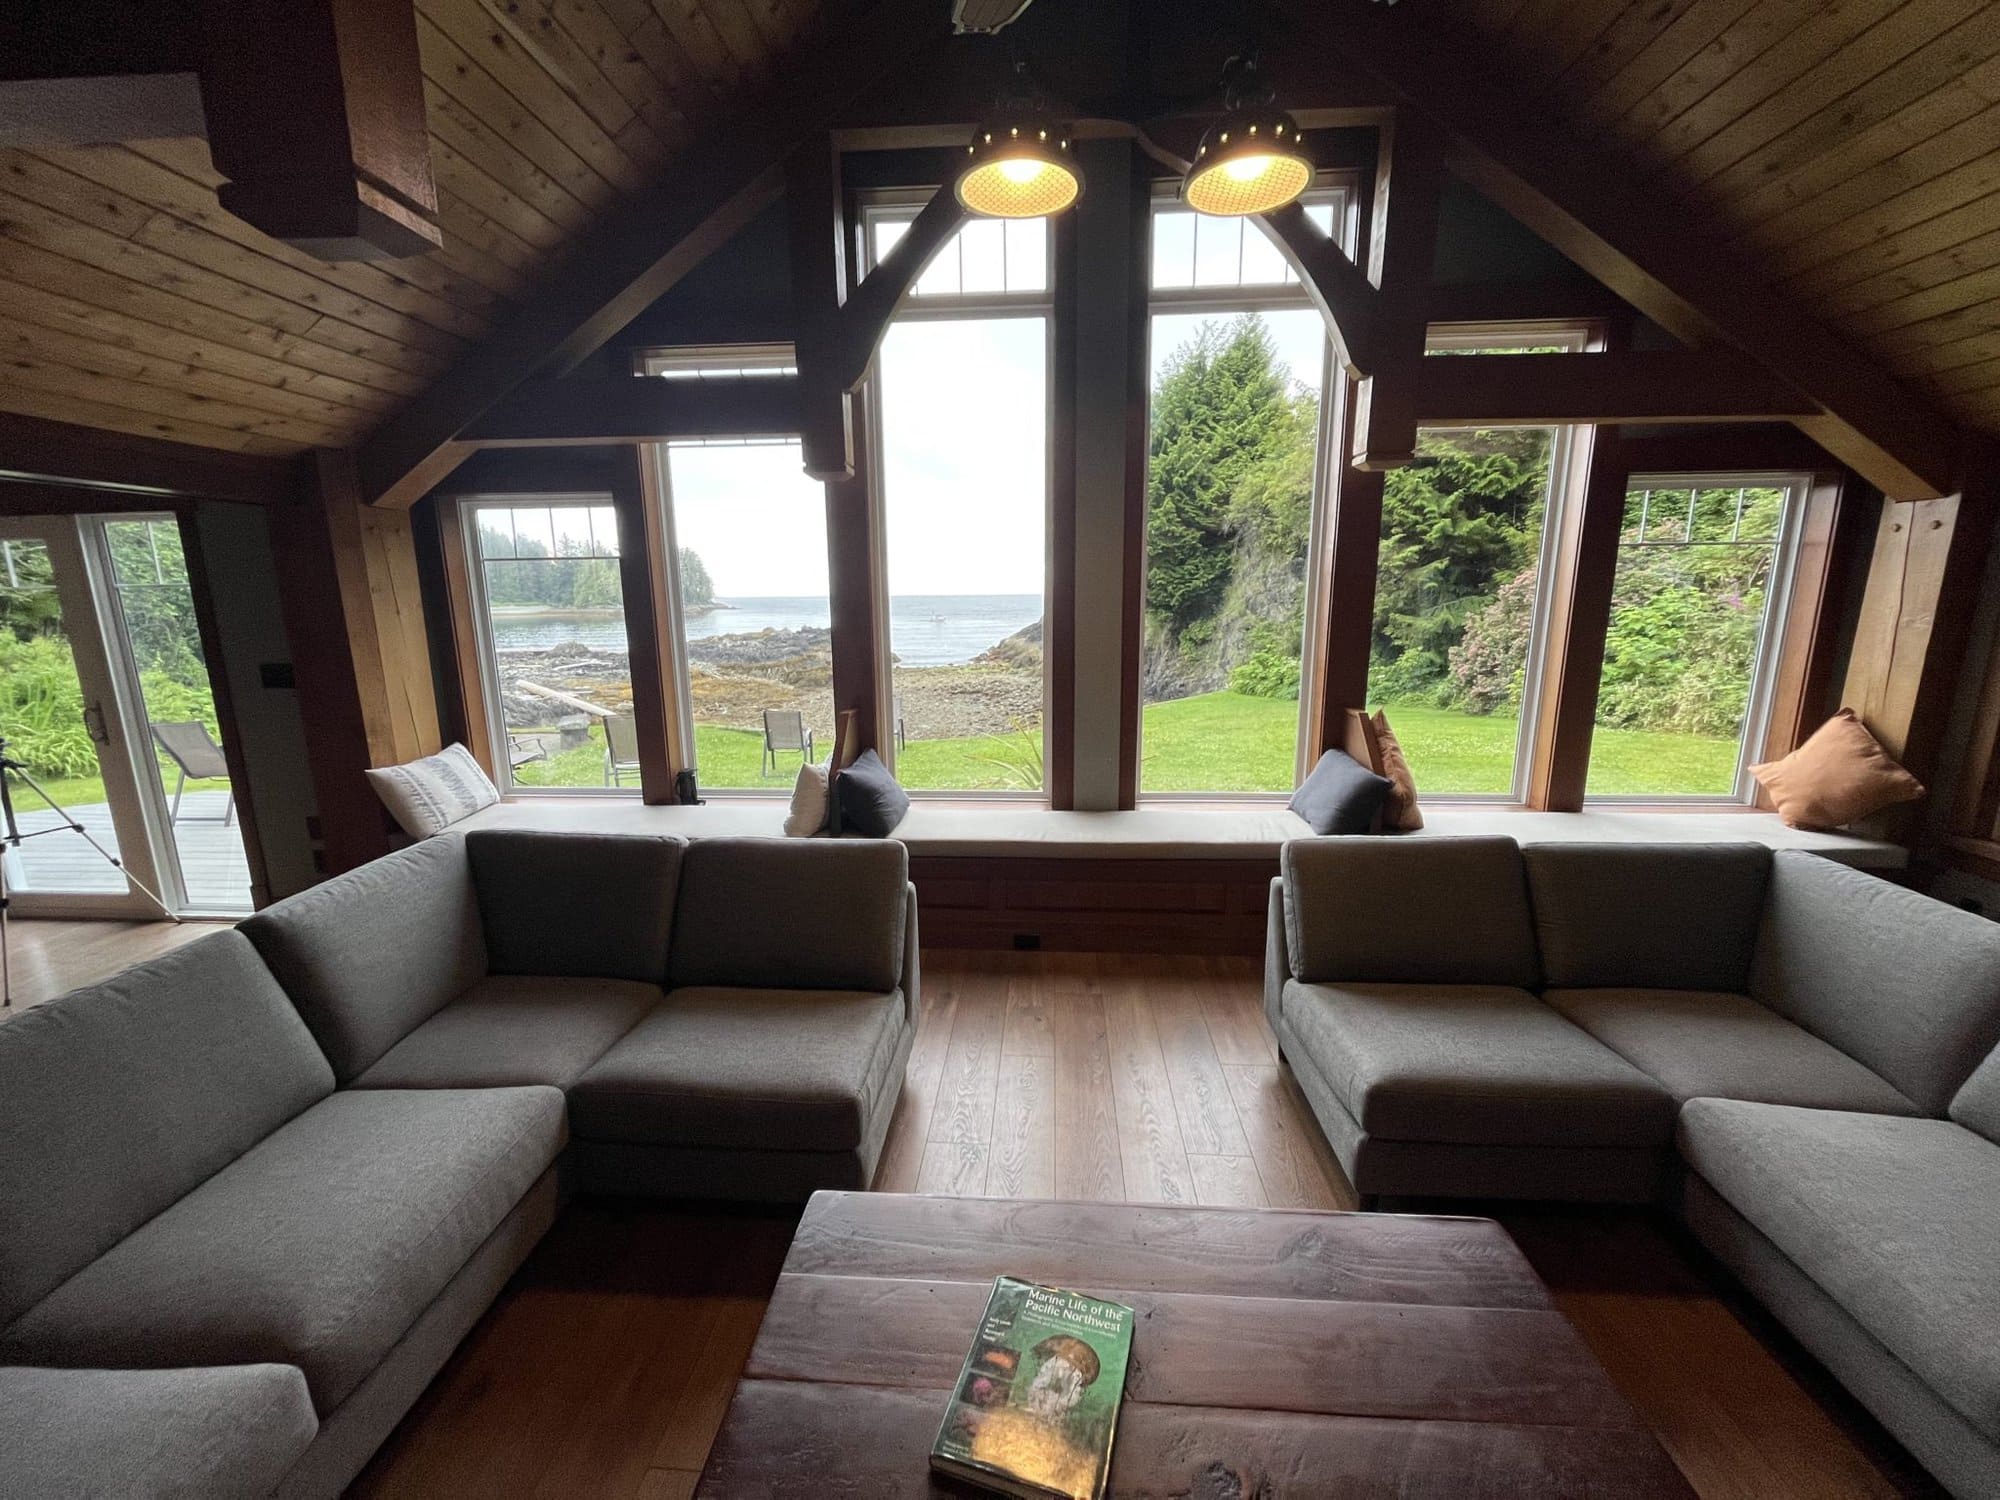 Photo: Great Room at Outer Shores Lodge | Credit: Scott Wallace